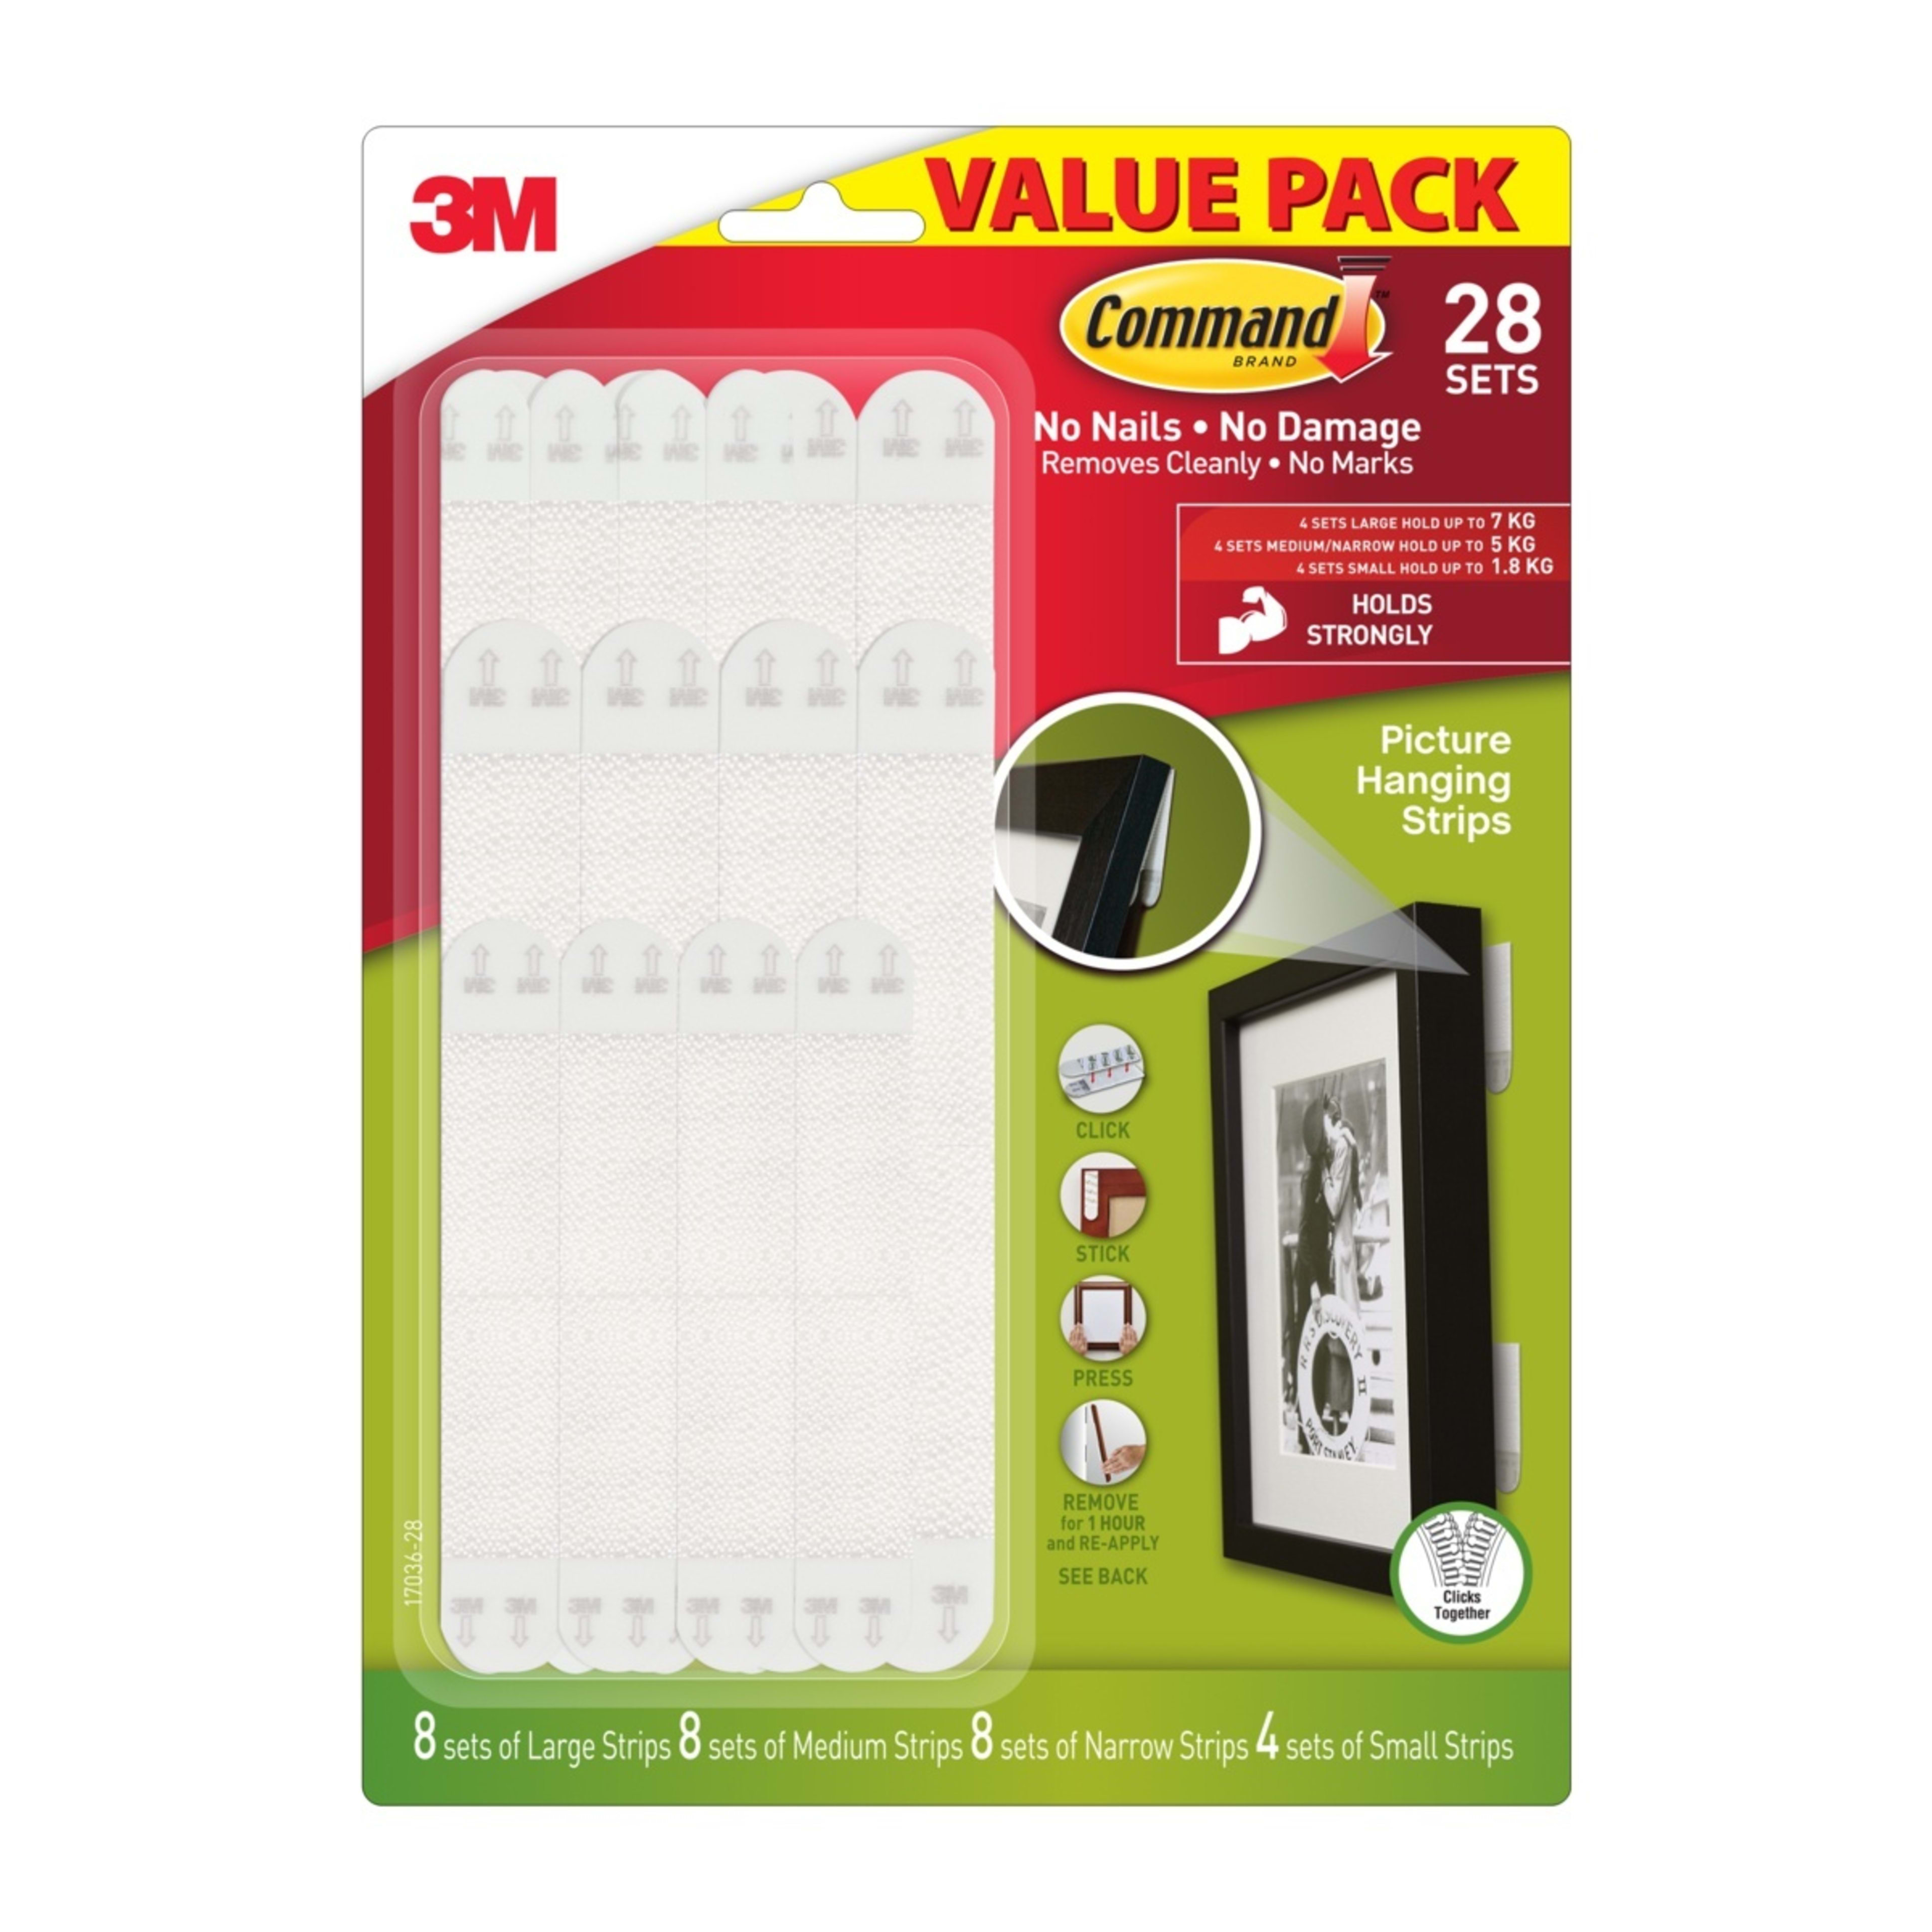 3M Command 28 Pack Picture Hanging Strips Value Pack